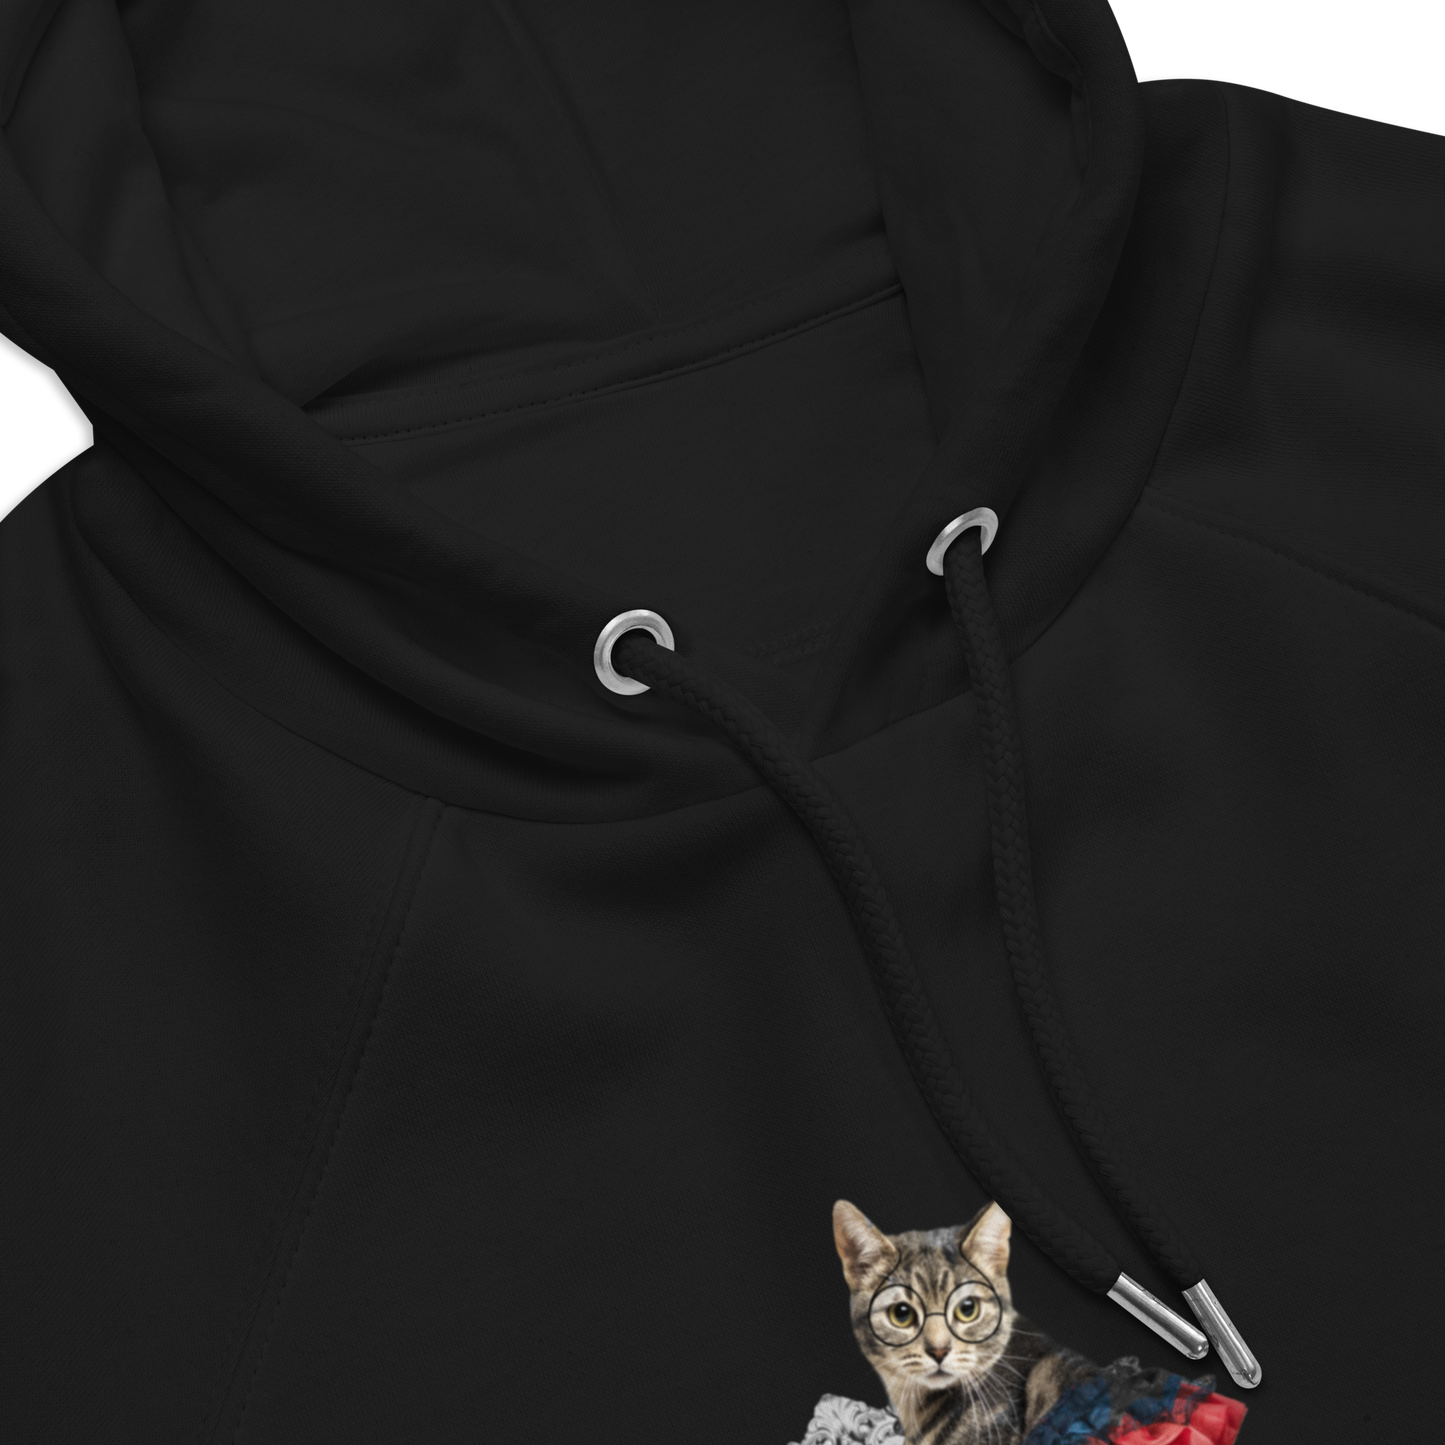 Front Details of a Black Anthropomorphic Cat Raglan Hoodie featuring an adorable Anthropomorphic Cat graphic on the chest - Cute Graphic Cat Hoodies - Boozy Fox